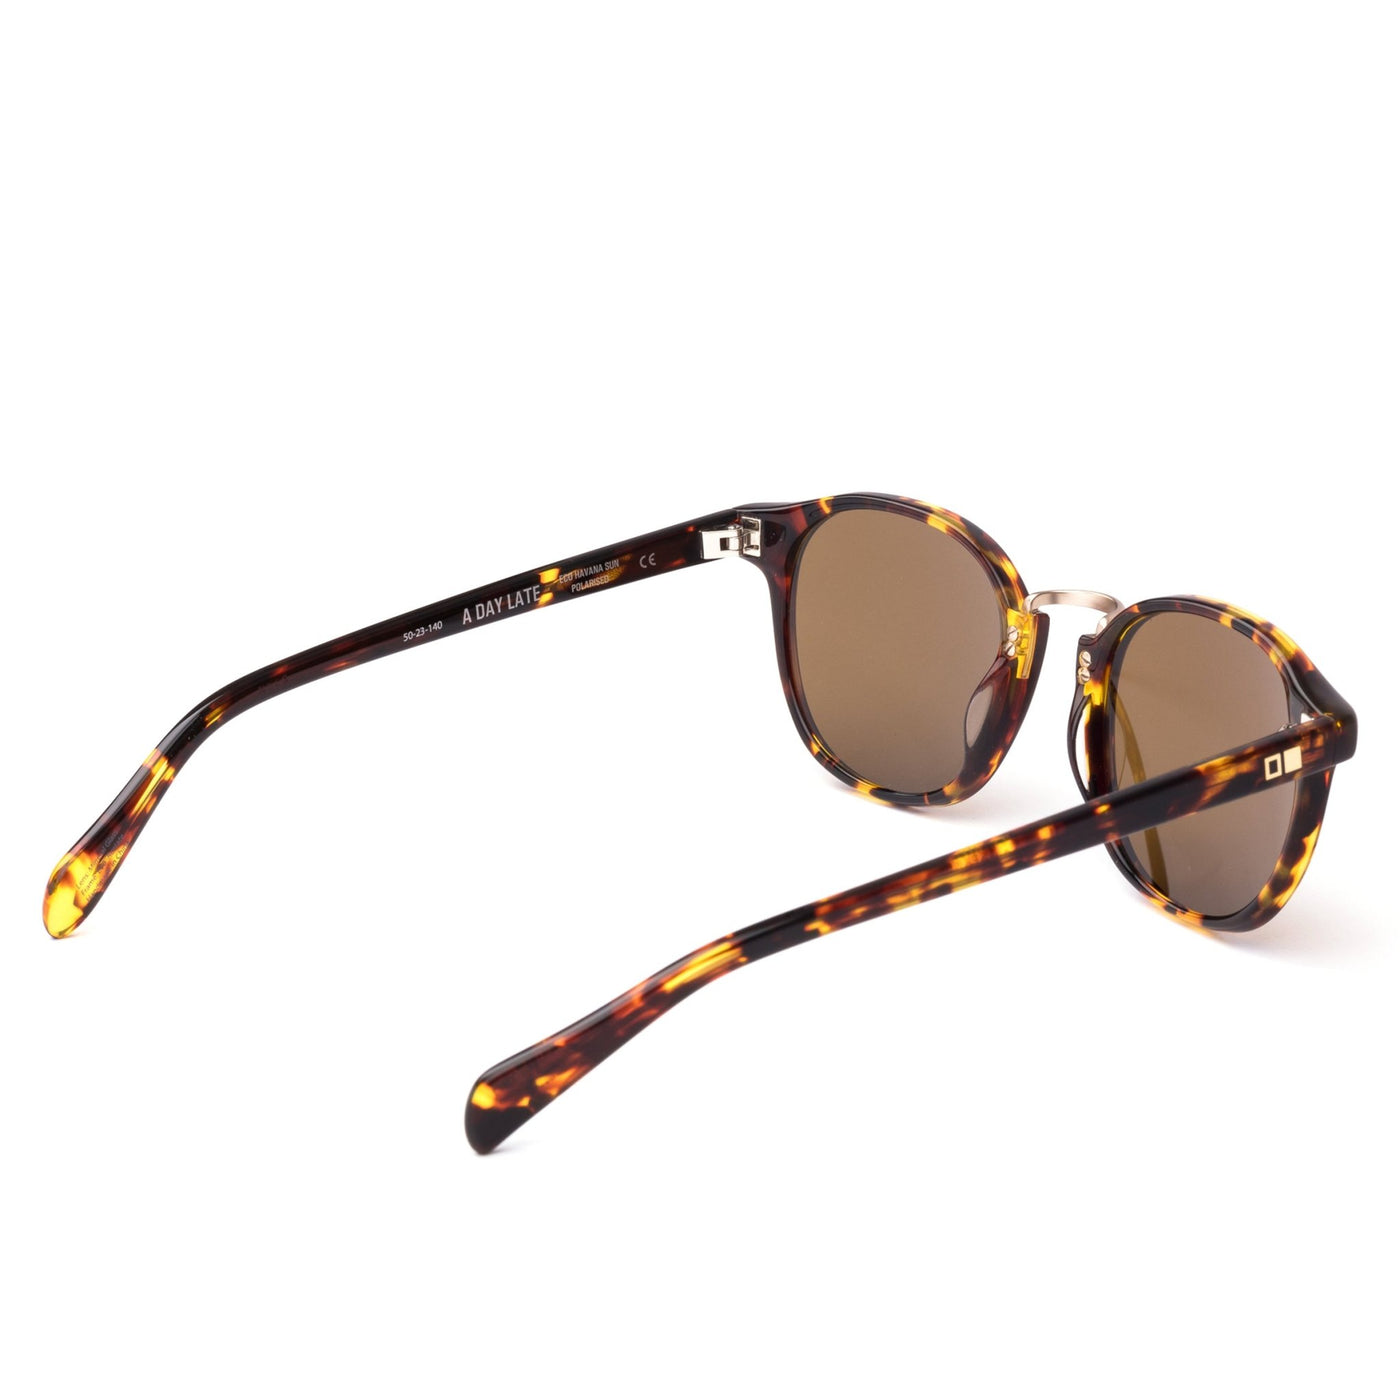 Round tort sunglasses with wire nose bridge from a back angle